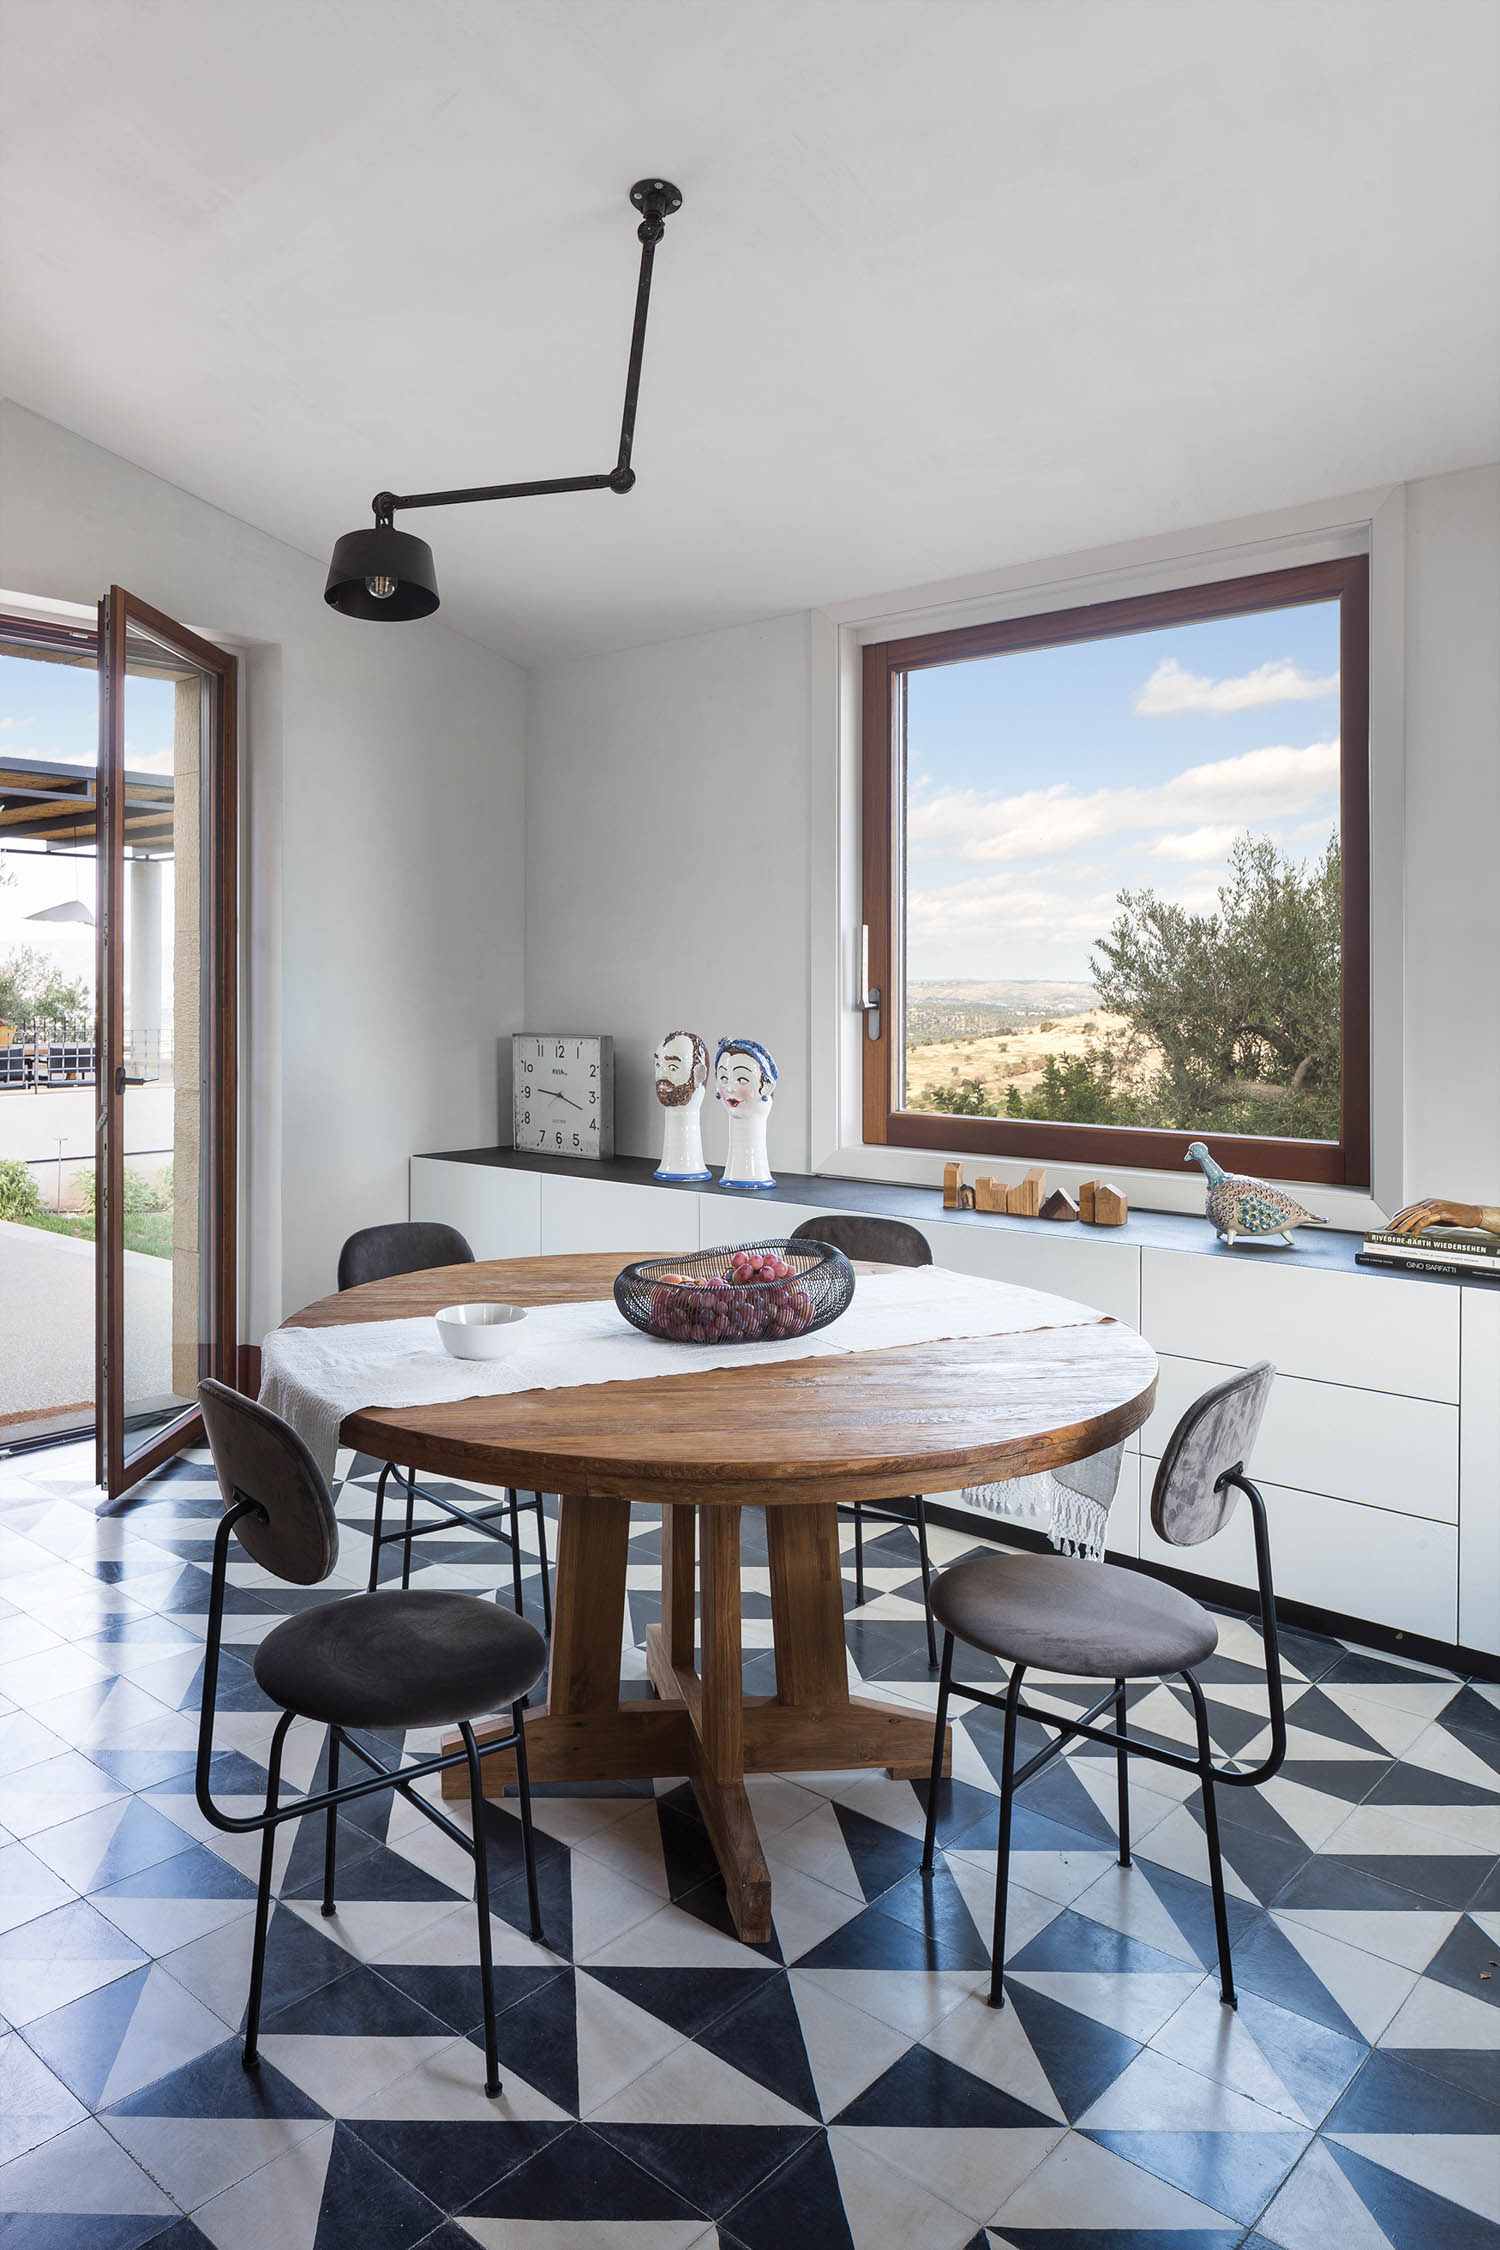 geometric shapes are present in the black and white tile floor of the dining area in an Italian villa